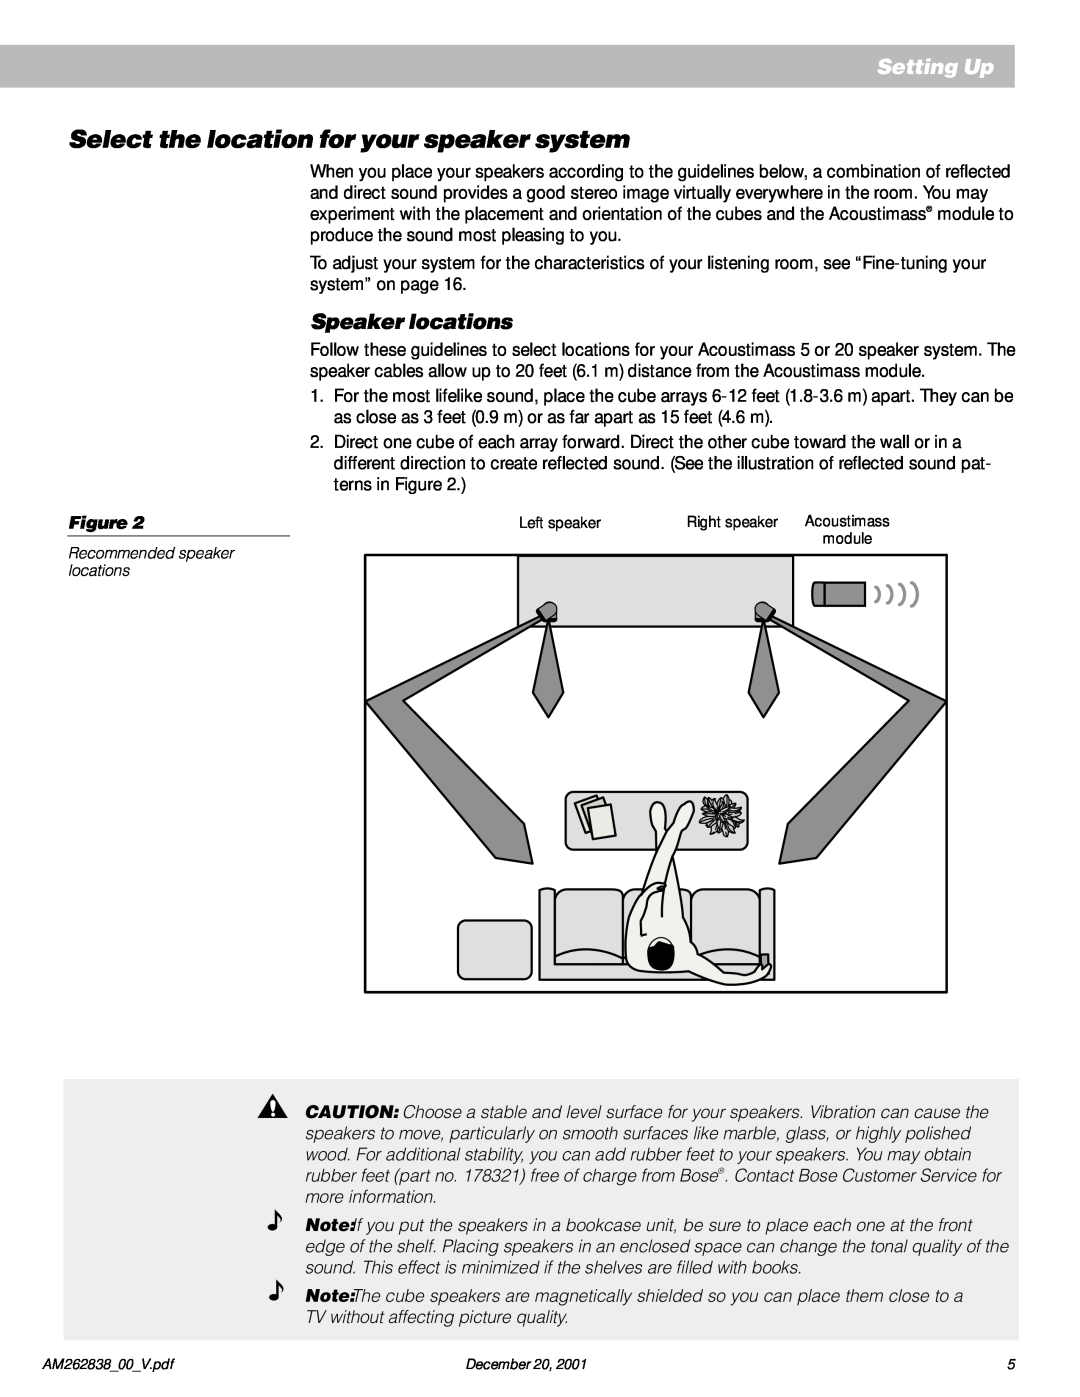 Bose AM262838_00_V manual Select the location for your speaker system, Speaker locations, Setting Up 